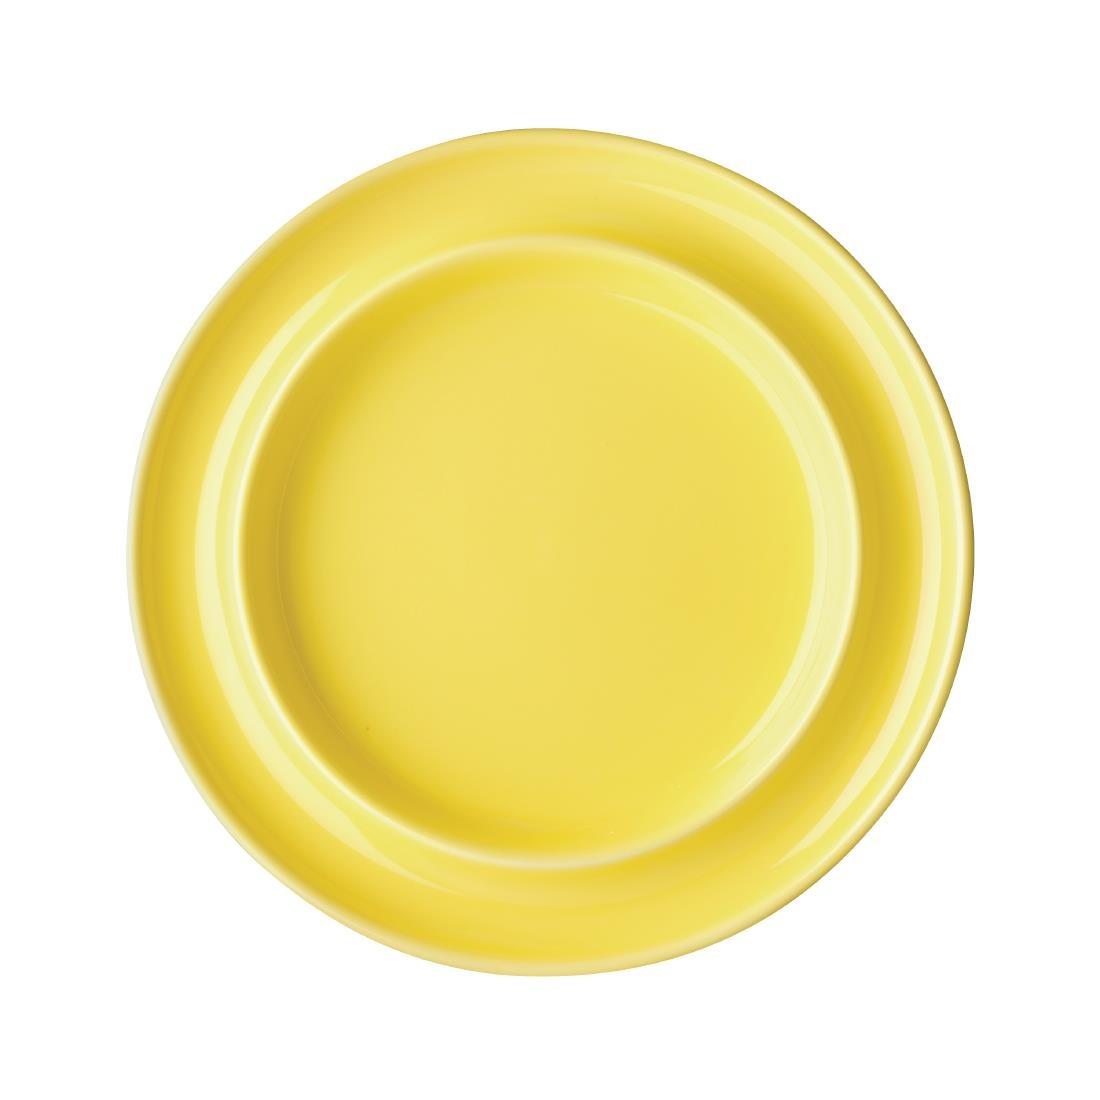 Olympia Heritage Raised Rim Plates Yellow 203mm (Pack of 4) - DW146  - 1